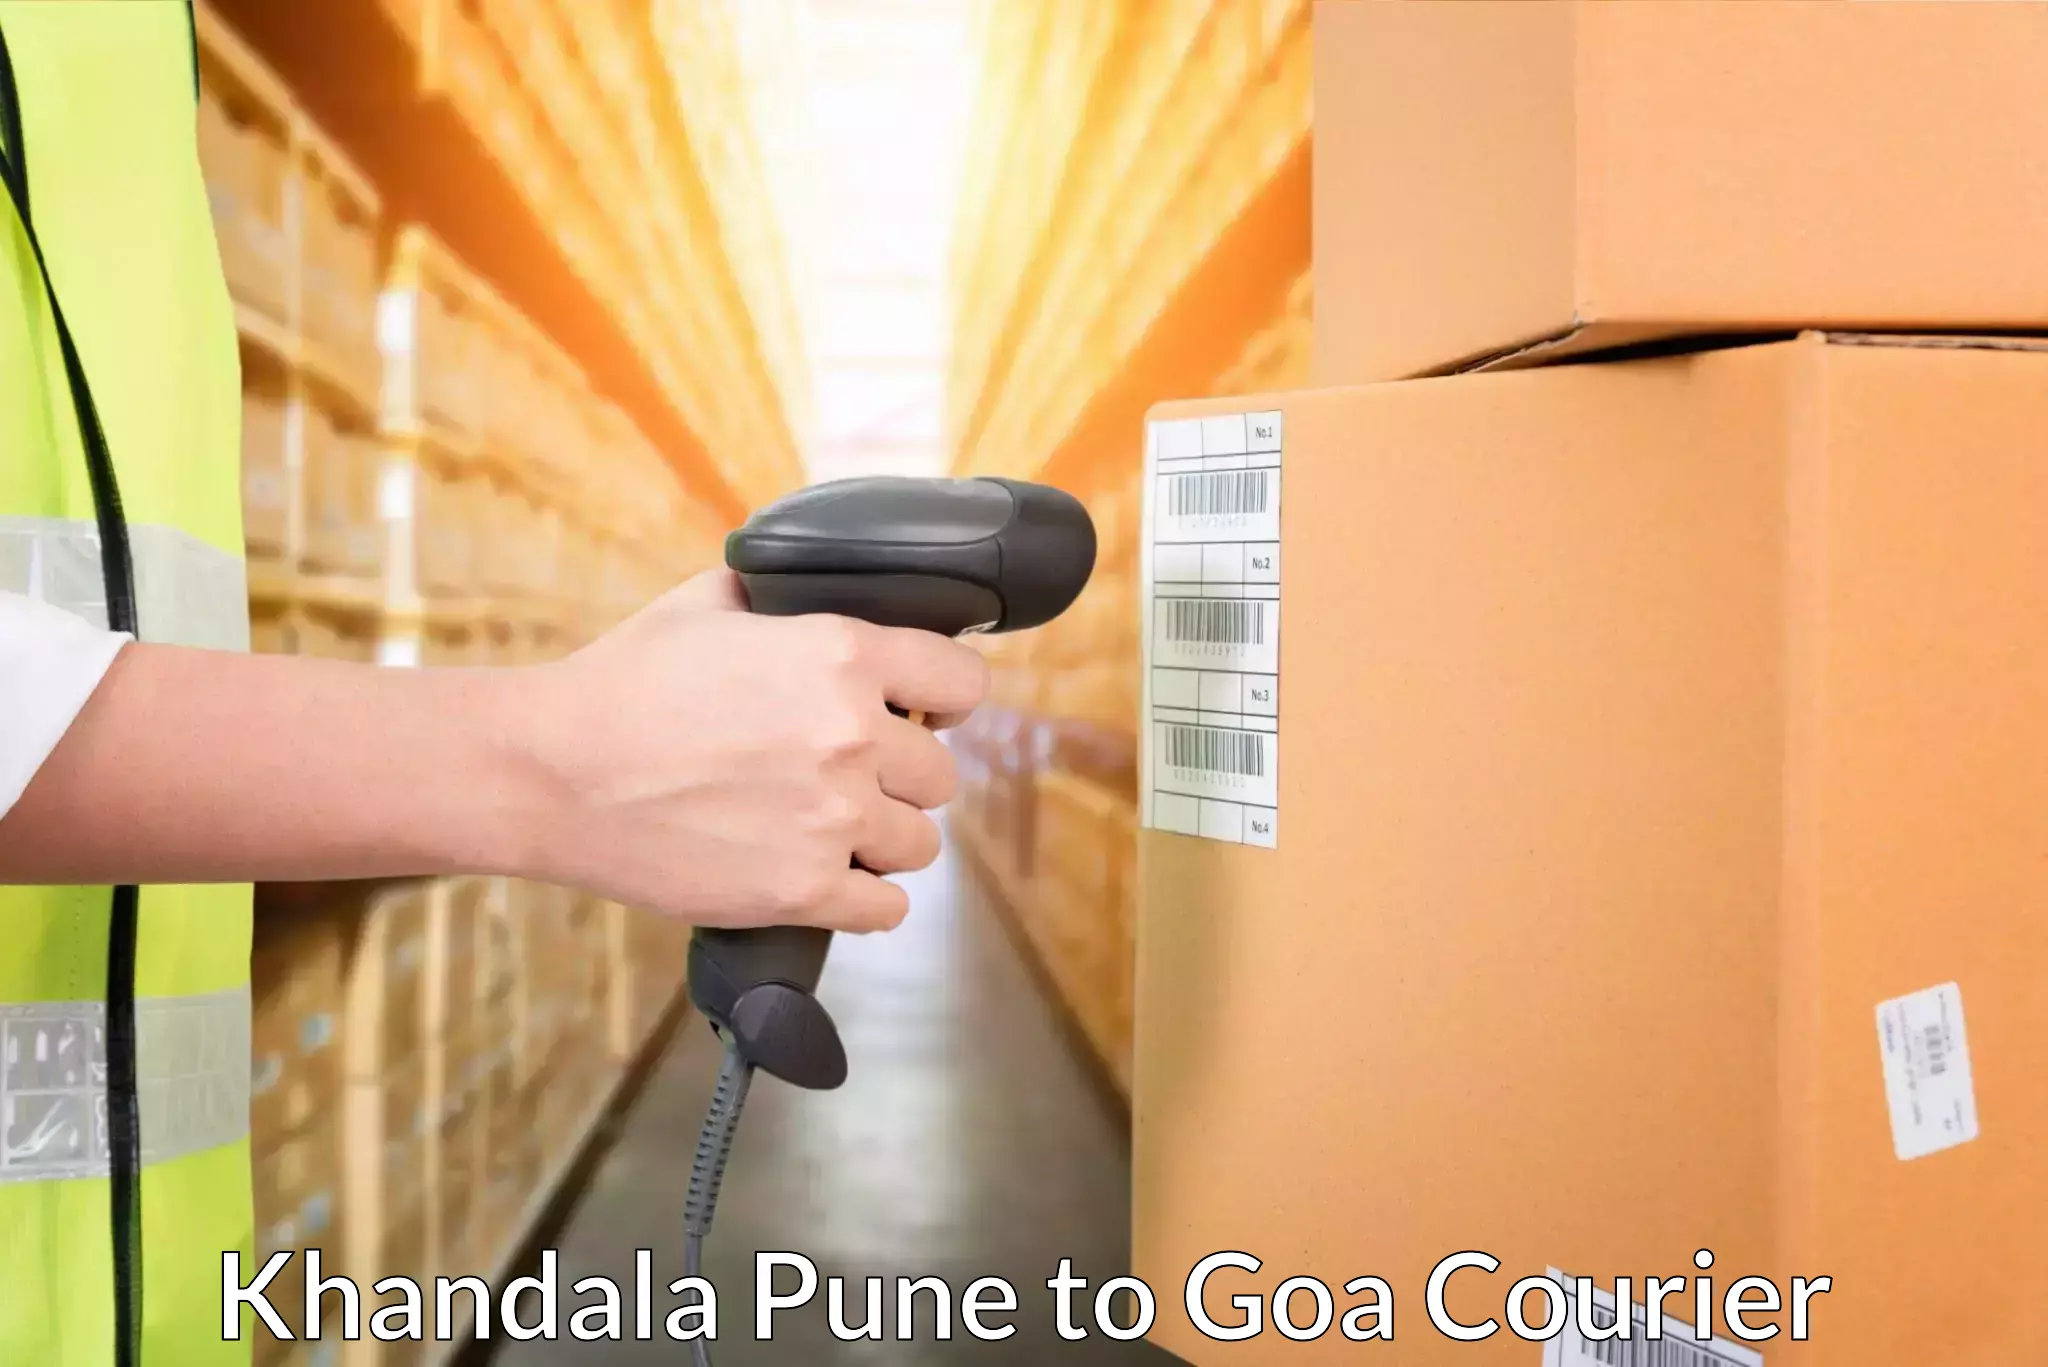 Local delivery service Khandala Pune to South Goa